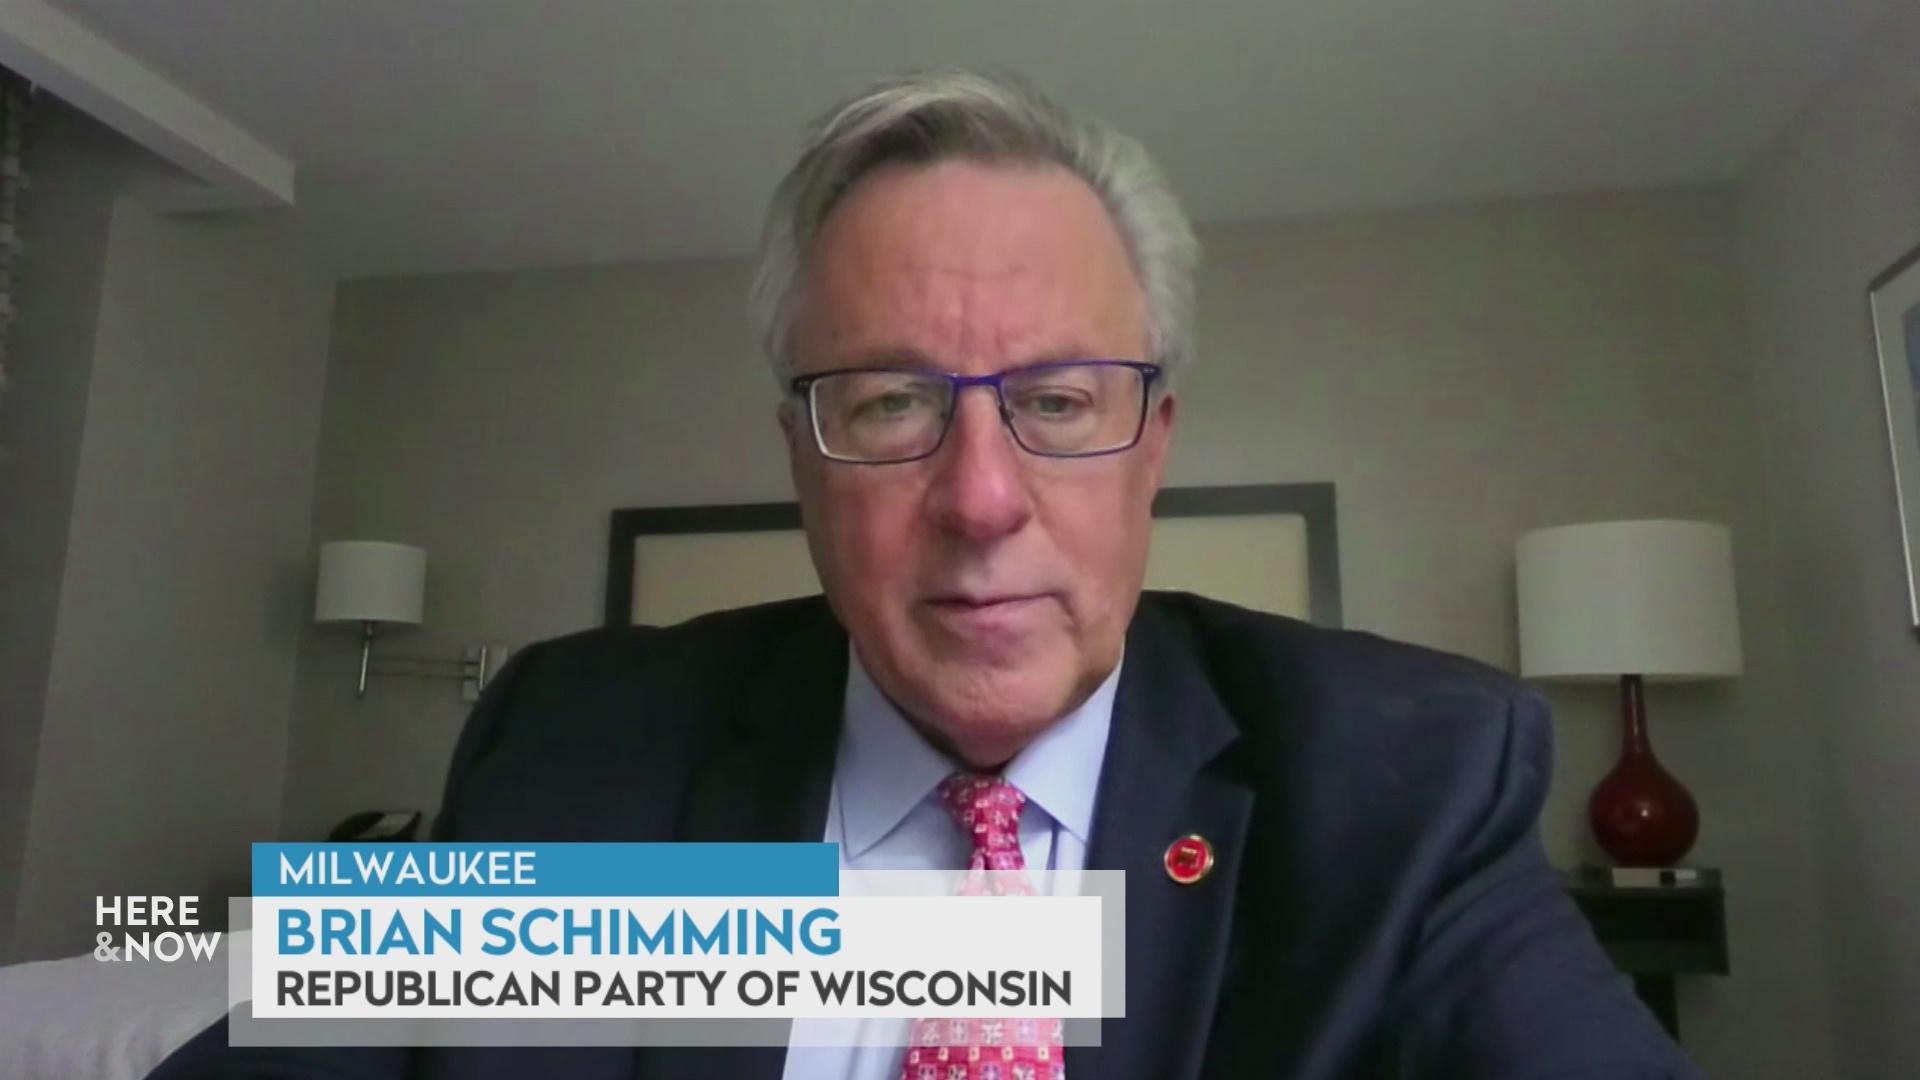 A still image from a video shows Brian Schimming seated in front of two wall lamps, with a graphic at bottom reading 'Milwaukee,' 'Brian Schimming' and 'Republican Party of Wisconsin.'